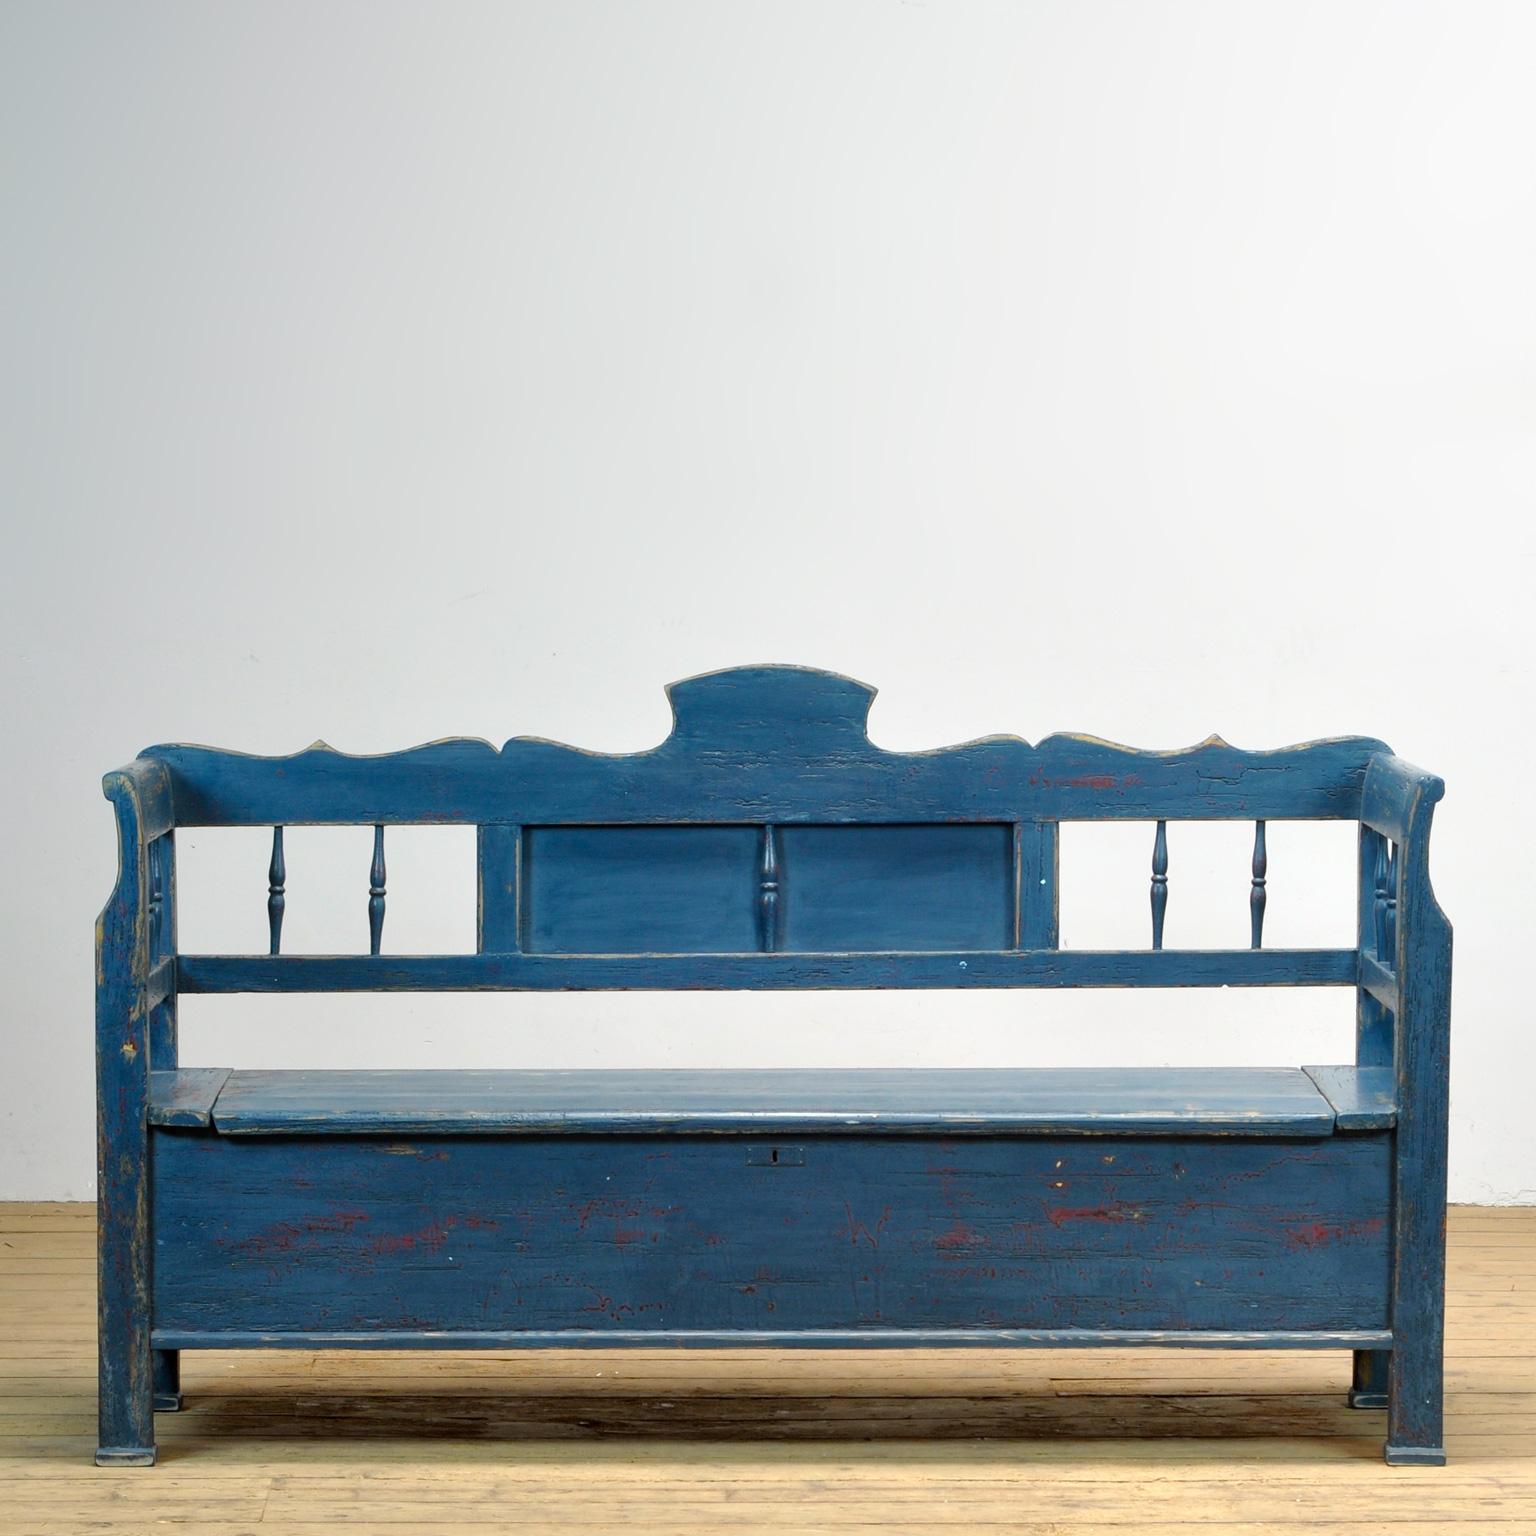 A charming bench from hungary with the original paint. Over time and use, the blue paint has been worn away in places to the wood. With storage space under the seat divided in three compartments. The bench is stable and sturdy. Free of woodworm. 